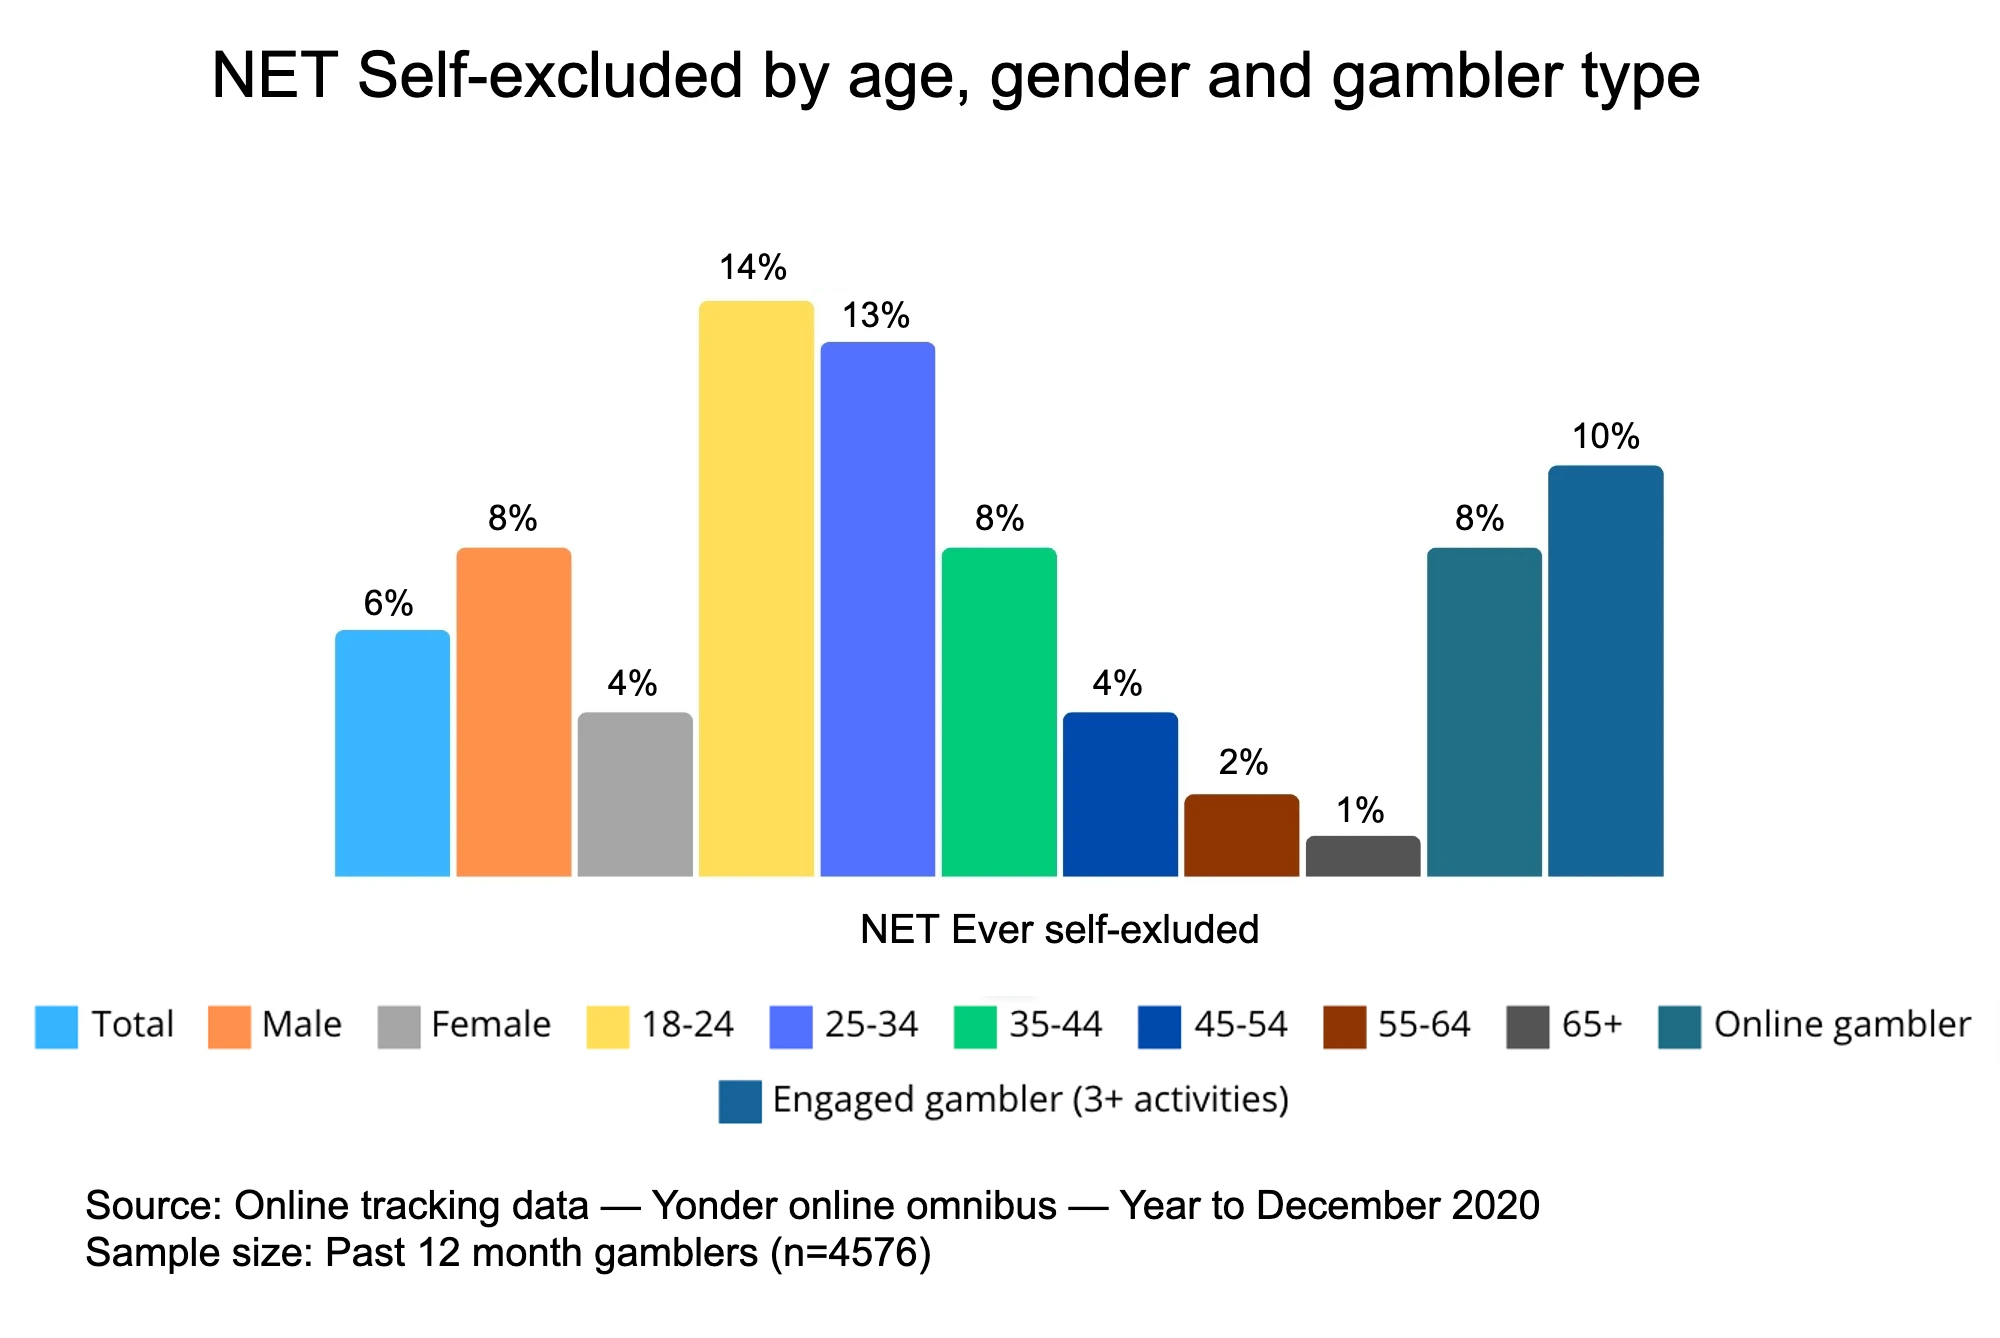 Breakdown of self-exclusion rates by age, gender and player categorisation.